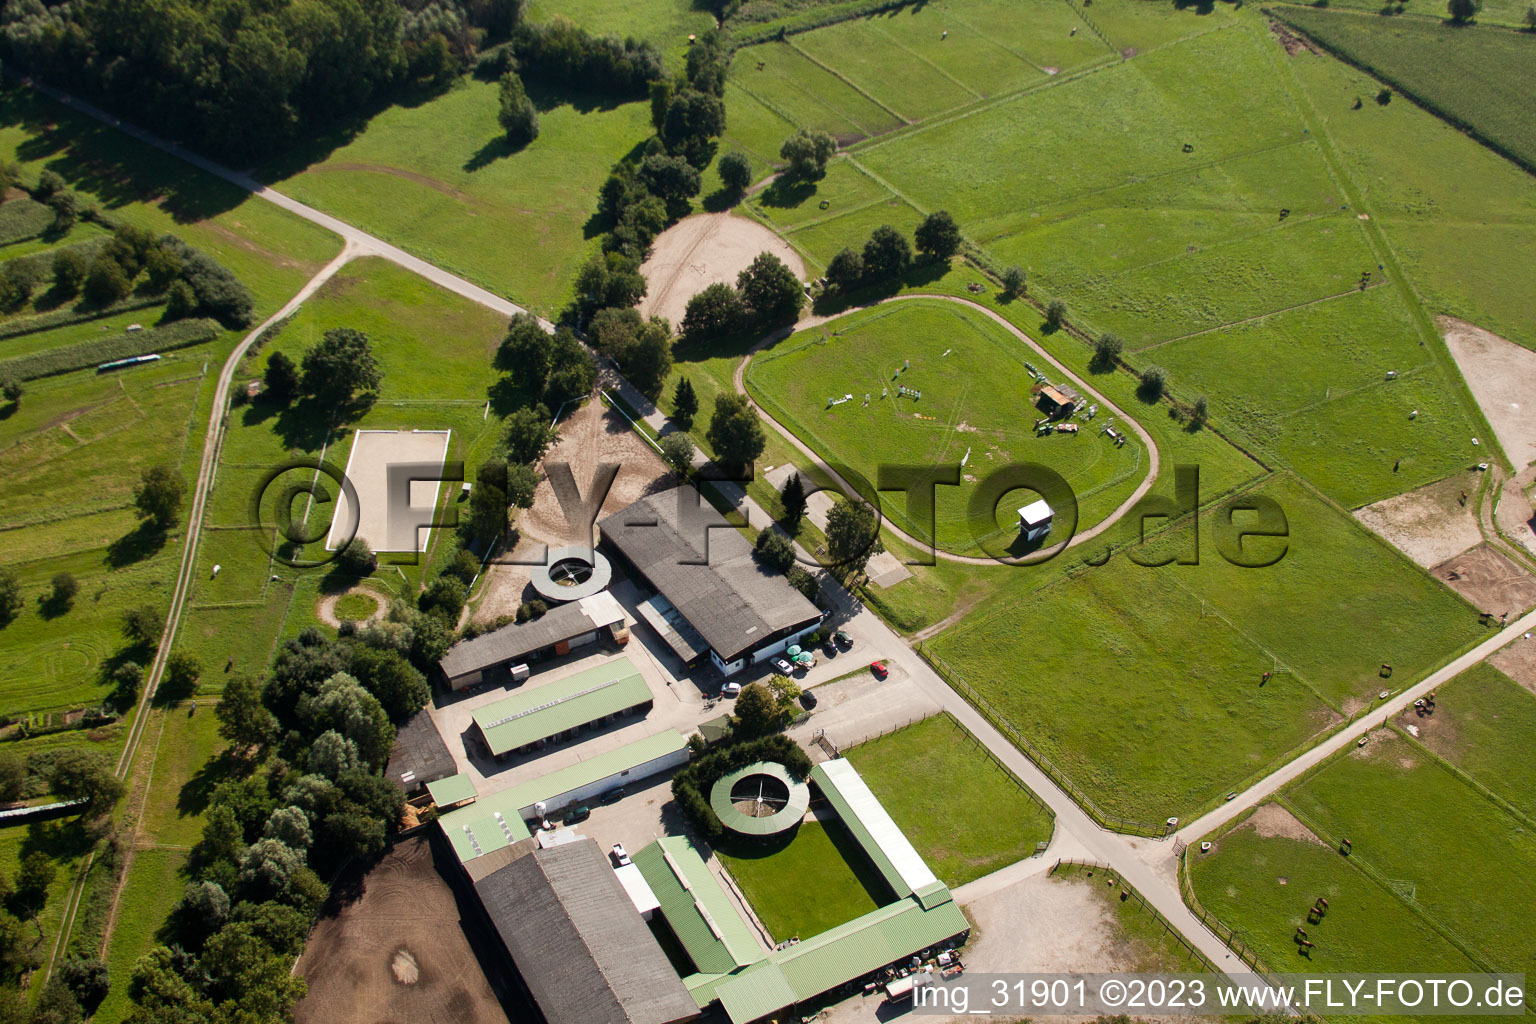 Schafhof horse farm in Muggensturm in the state Baden-Wuerttemberg, Germany out of the air